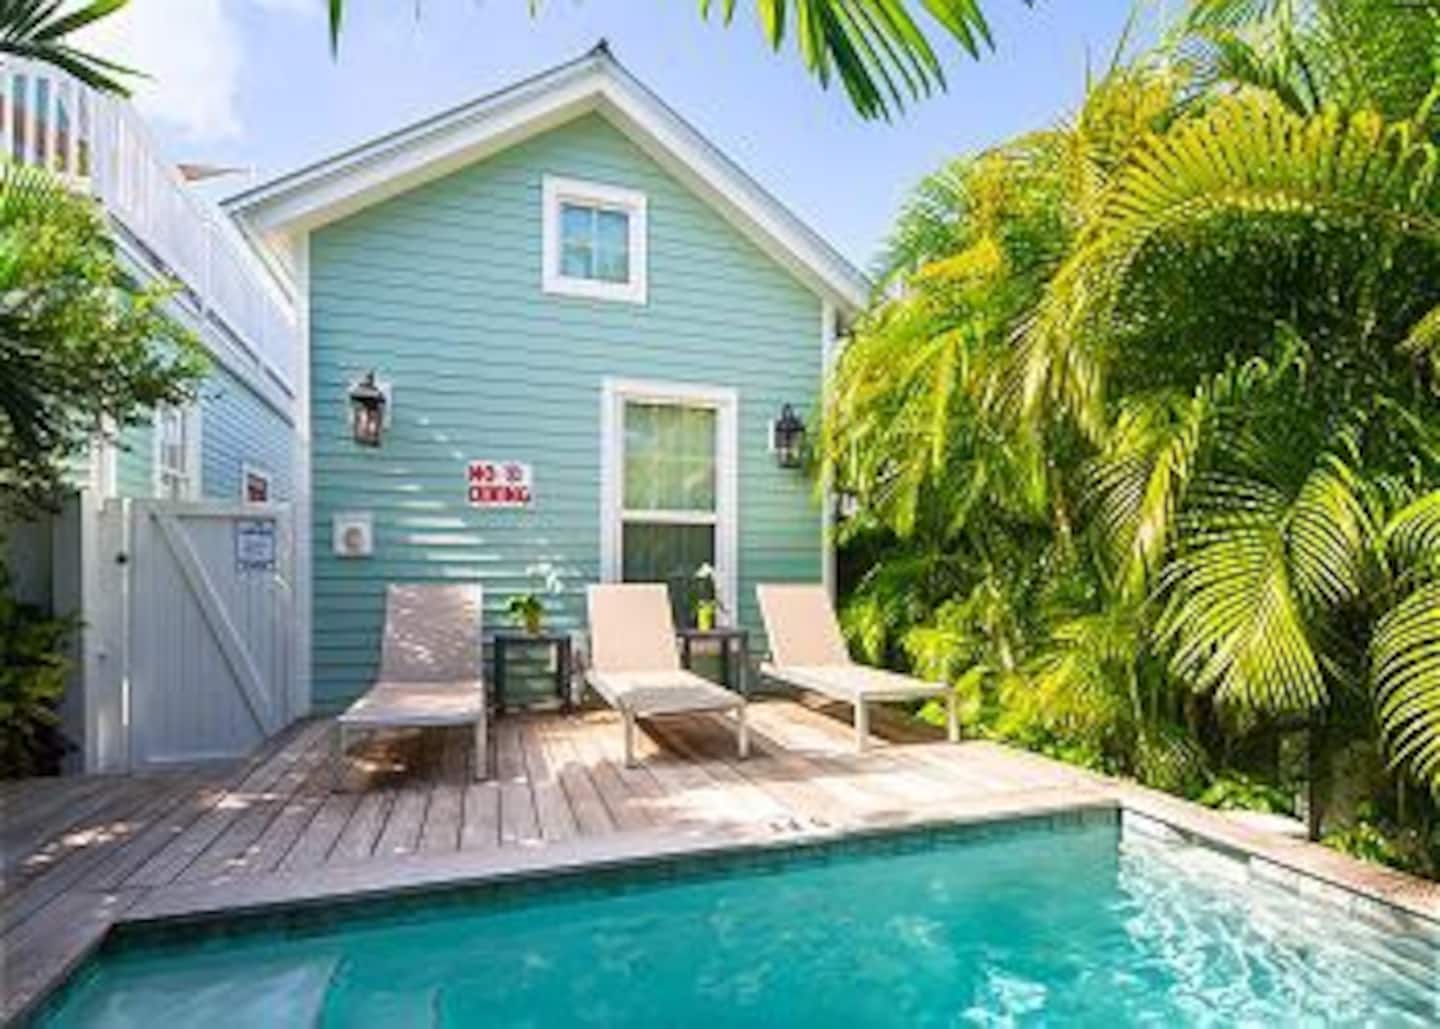 LITTLE TRUMAN COTTAGE - New Airbnb in Key West with Pool